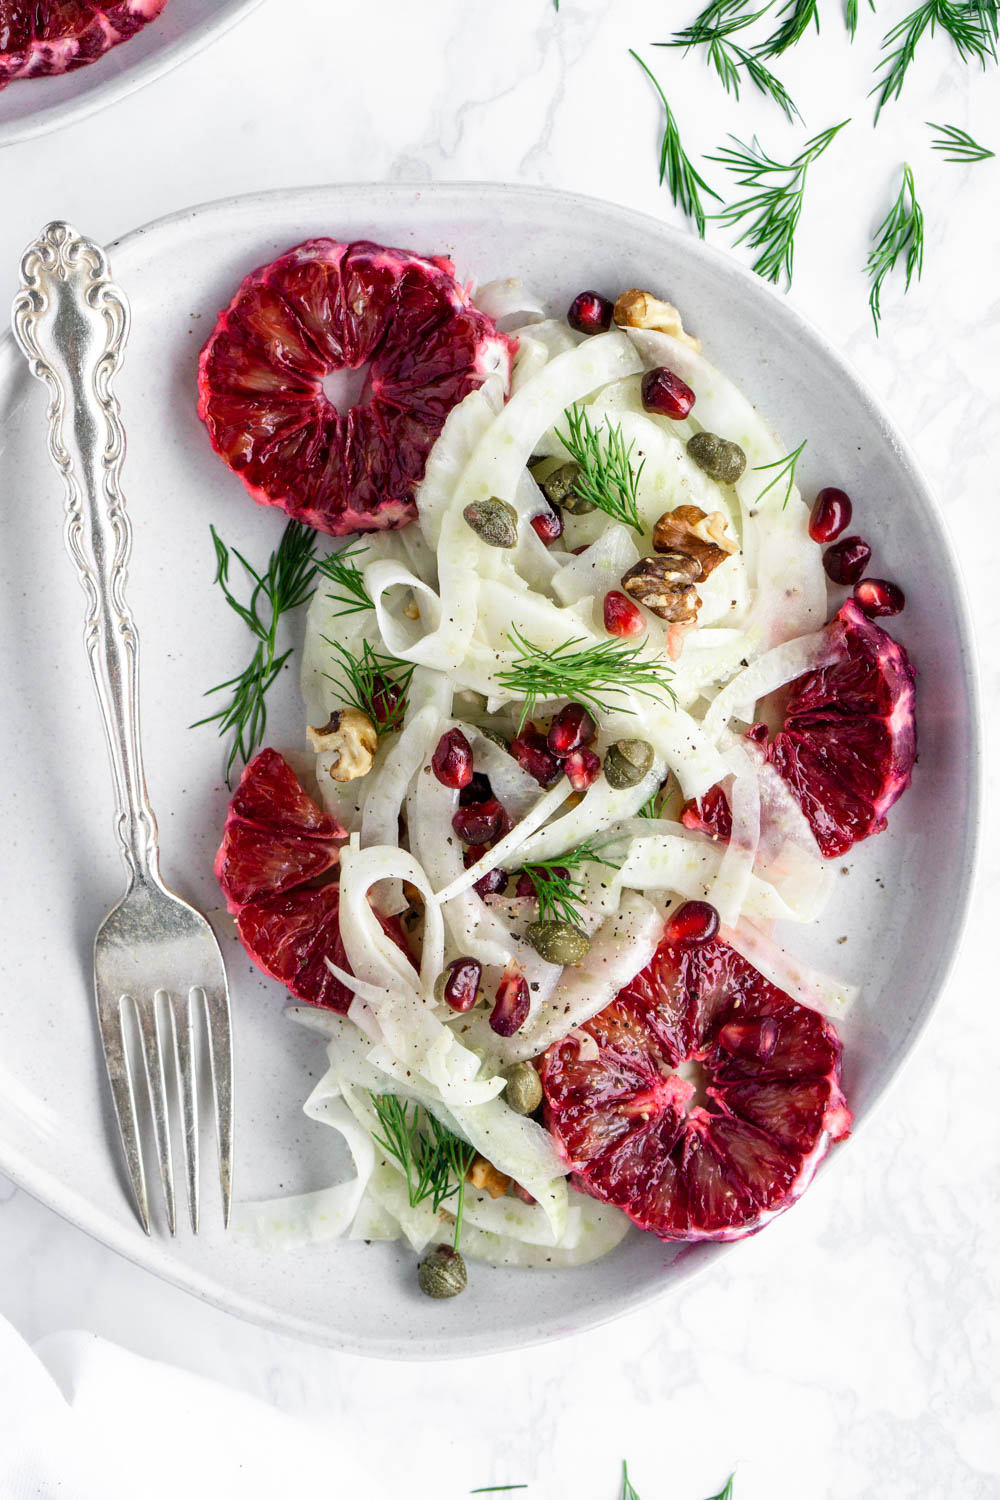 Winter Fennel Salad with Blood Orange Pomegranate and Capers